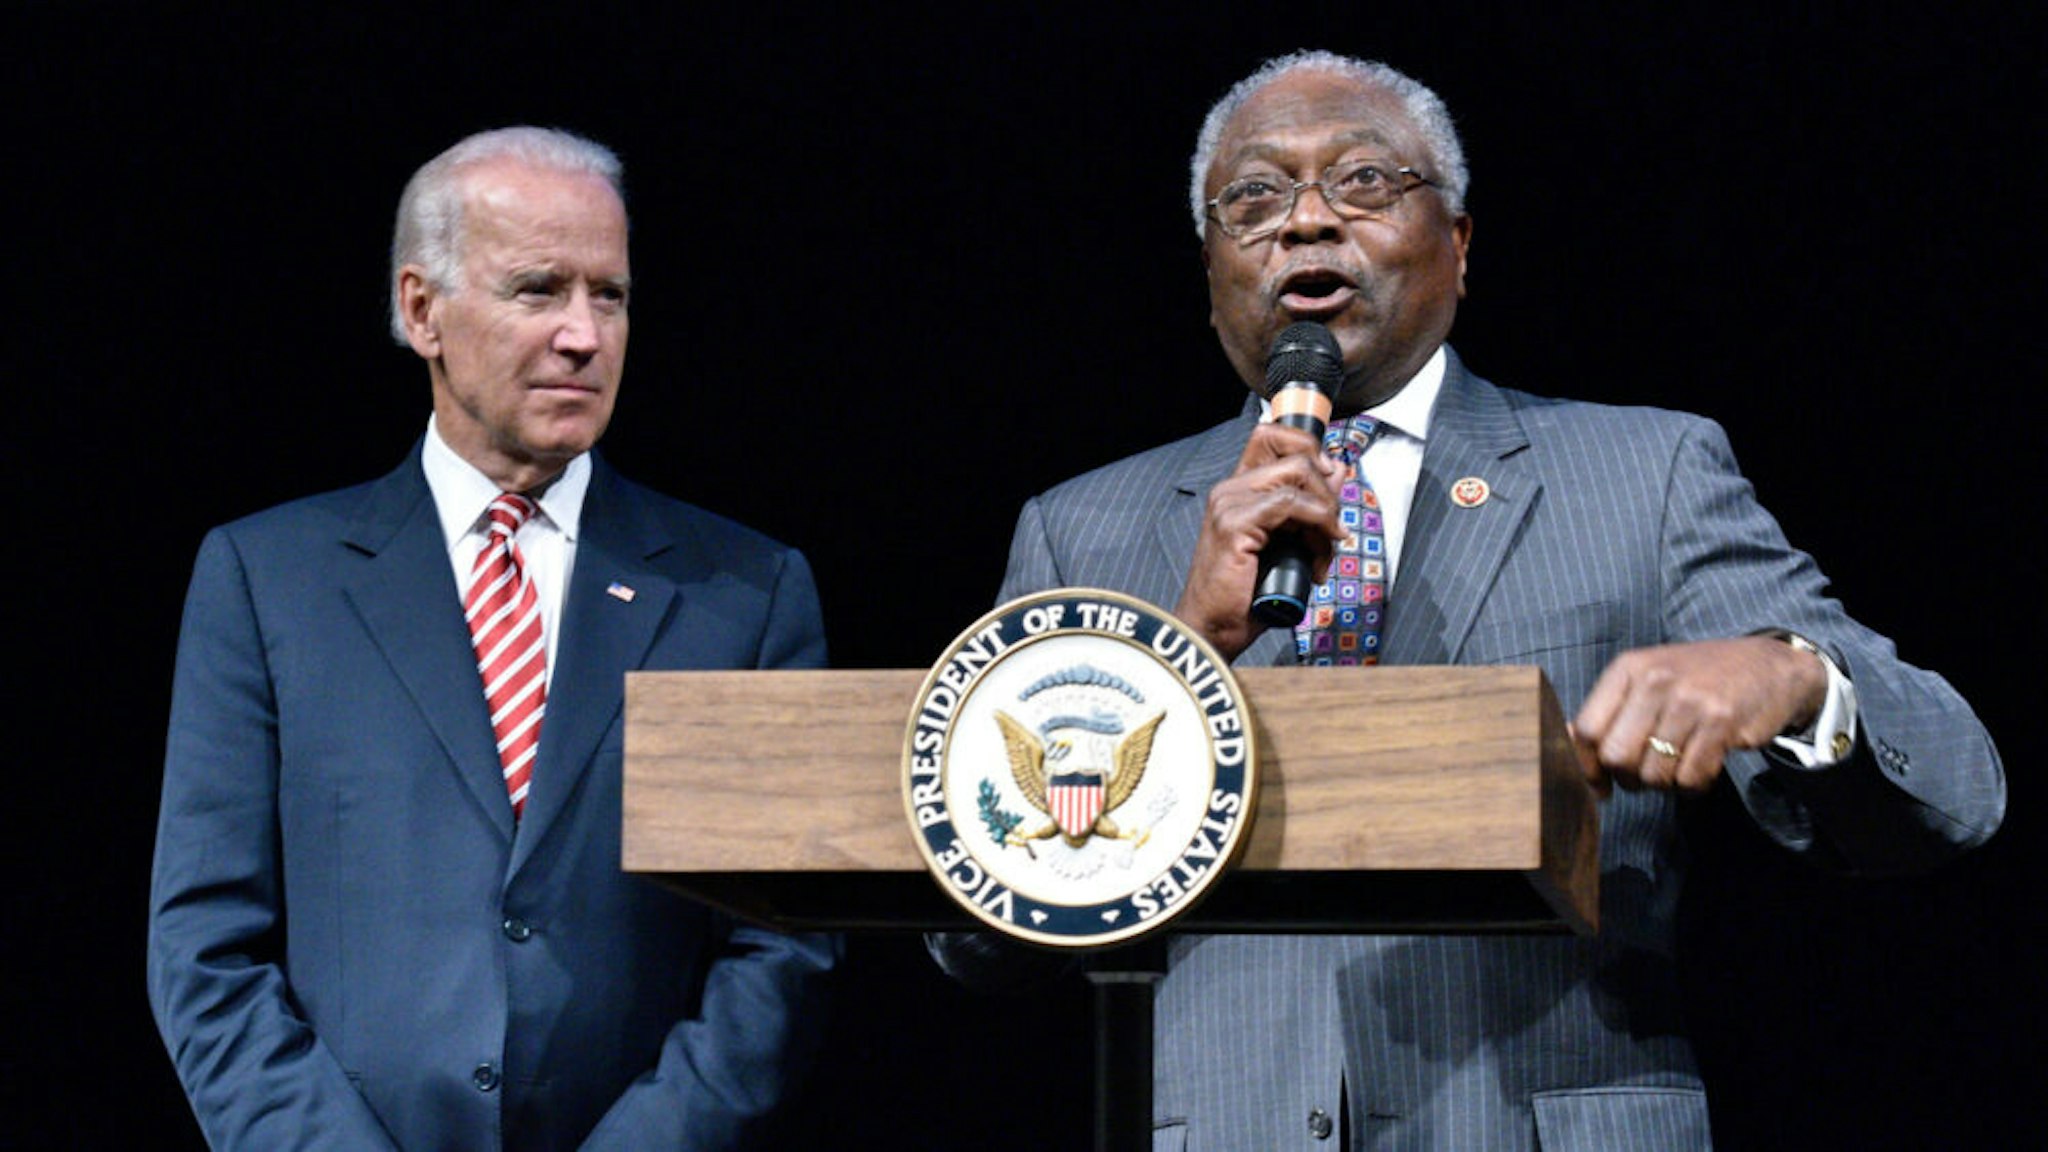 WASHINGTON, DC - SEPTEMBER 24: (L-R) Vice President Joe Biden is introduced by U.S. Representative James Clyburn at the CBC Spouses 17th Annual Celebration of Leadership in the Fine Arts at the Nuseum Museum on September 24, 2014 in Washington, DC.